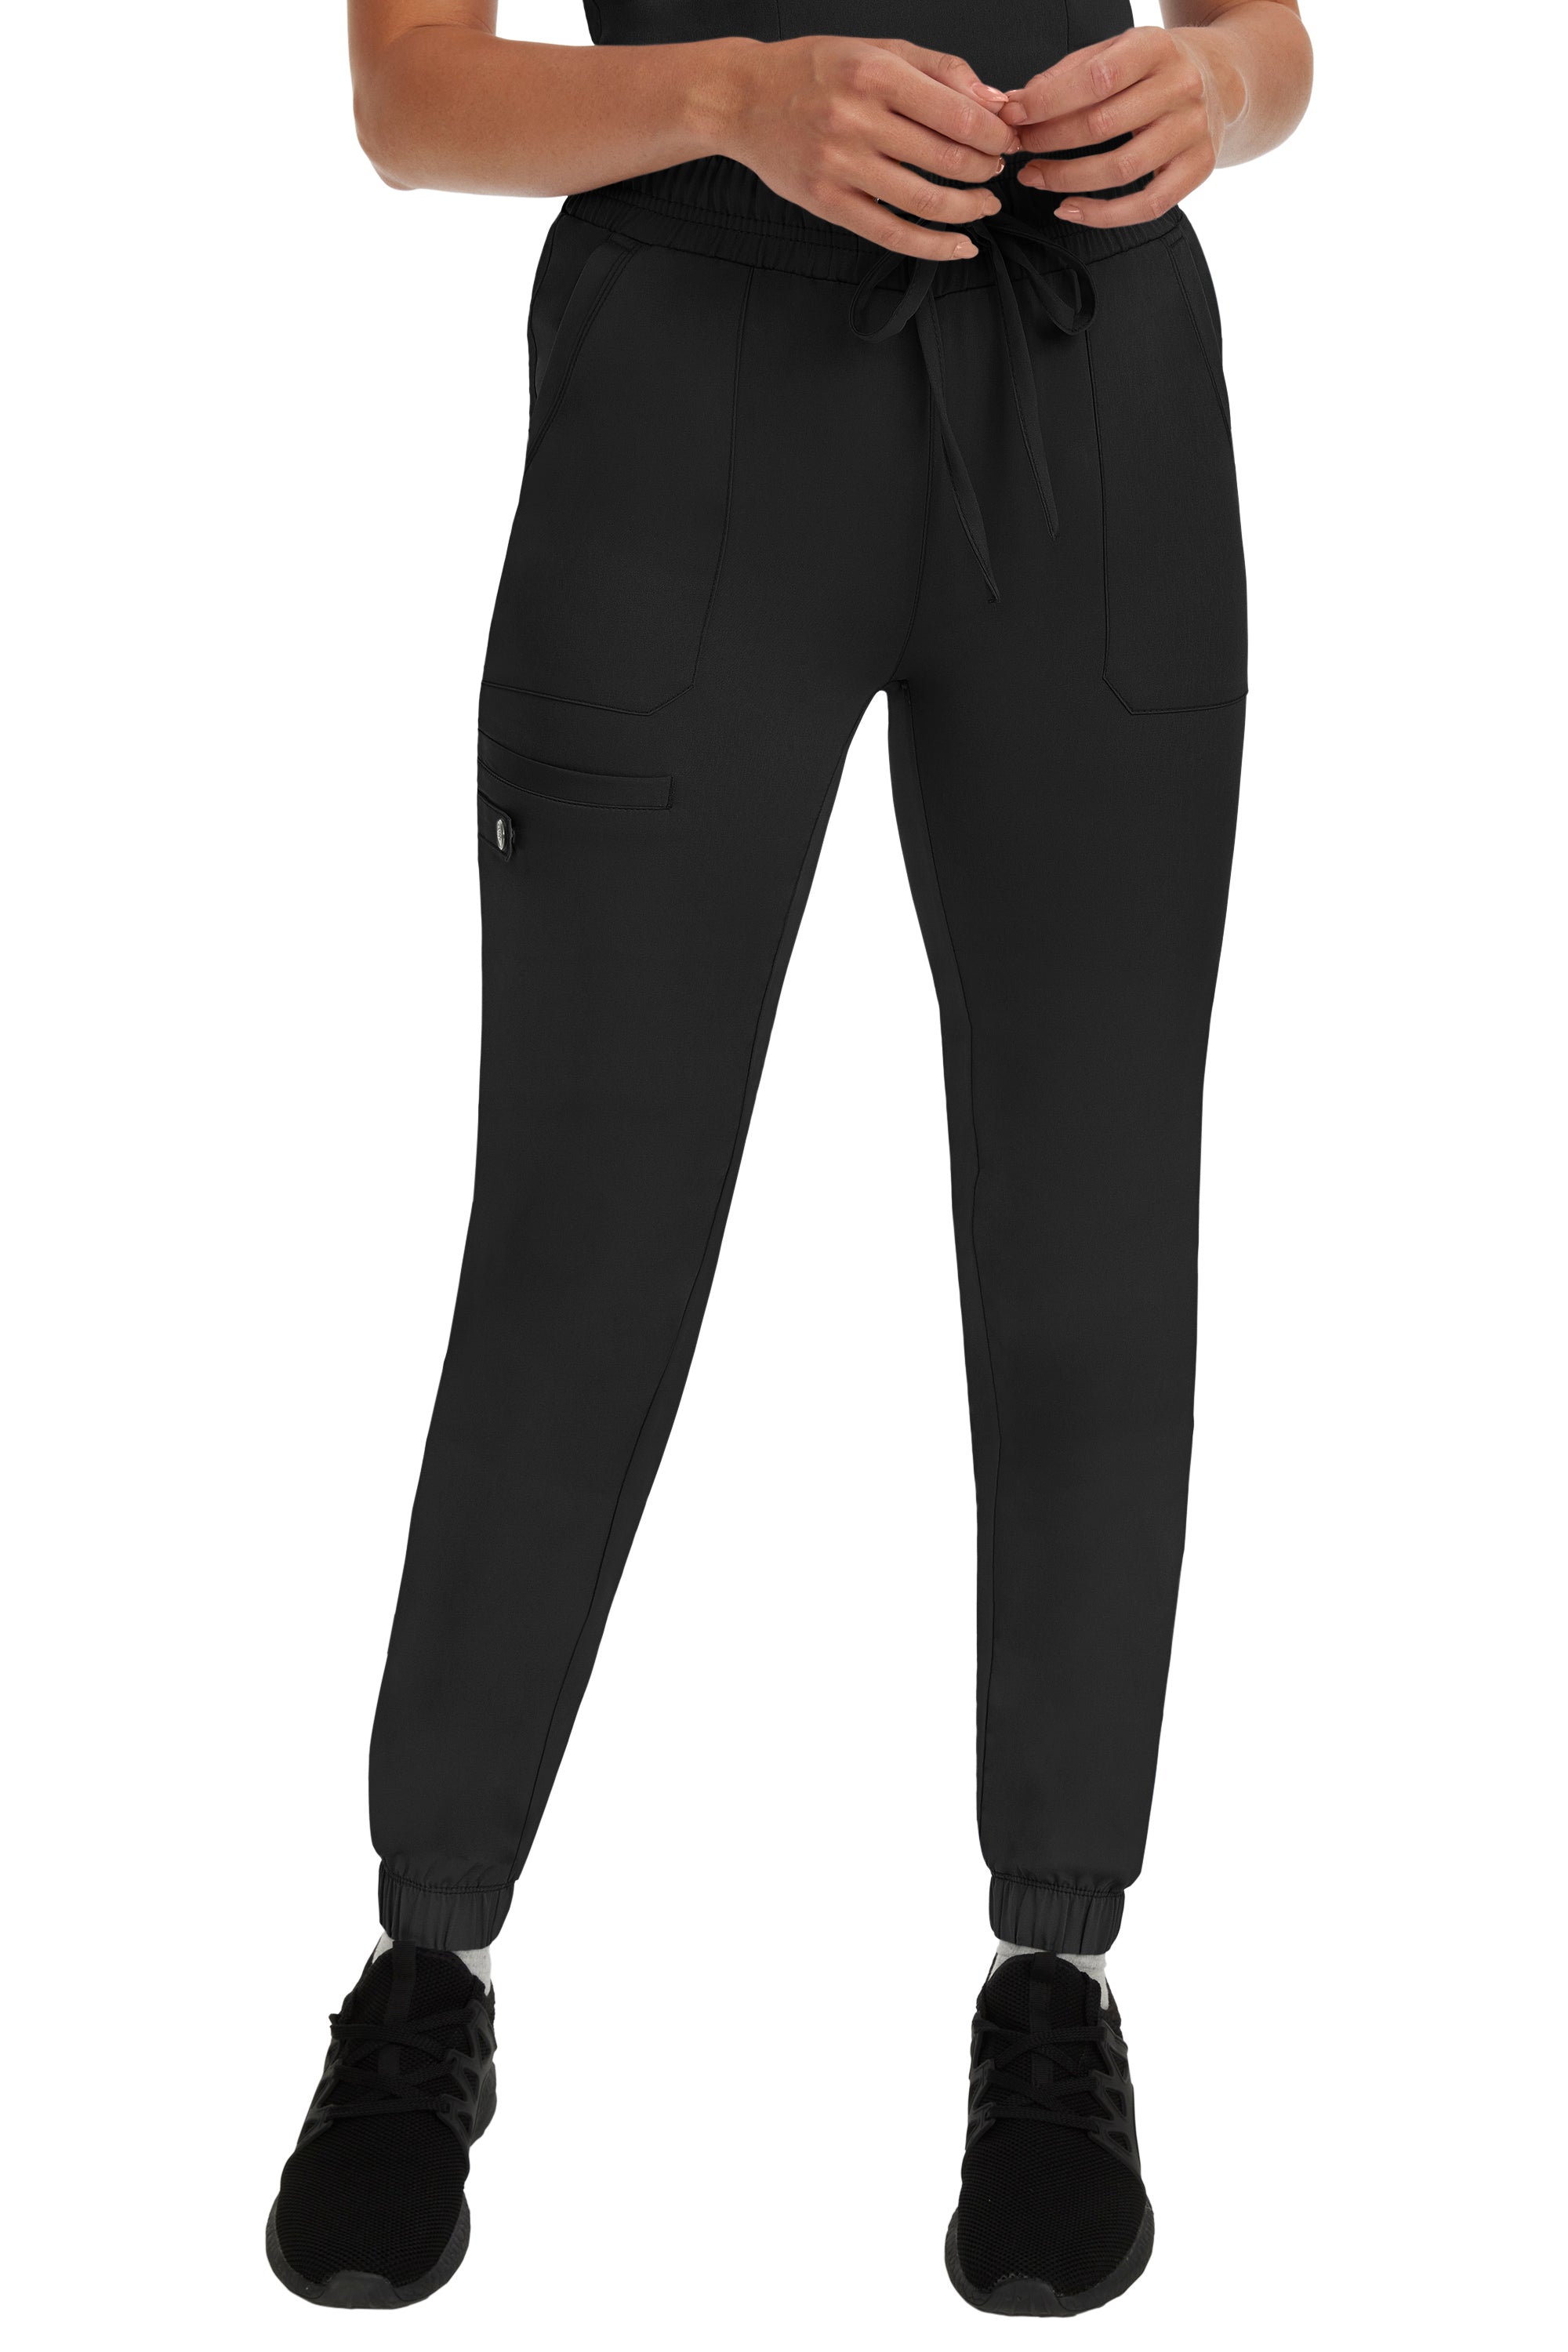 Healing Hands HH Works 9575 Renee Jogger Pant – Valley West Uniforms